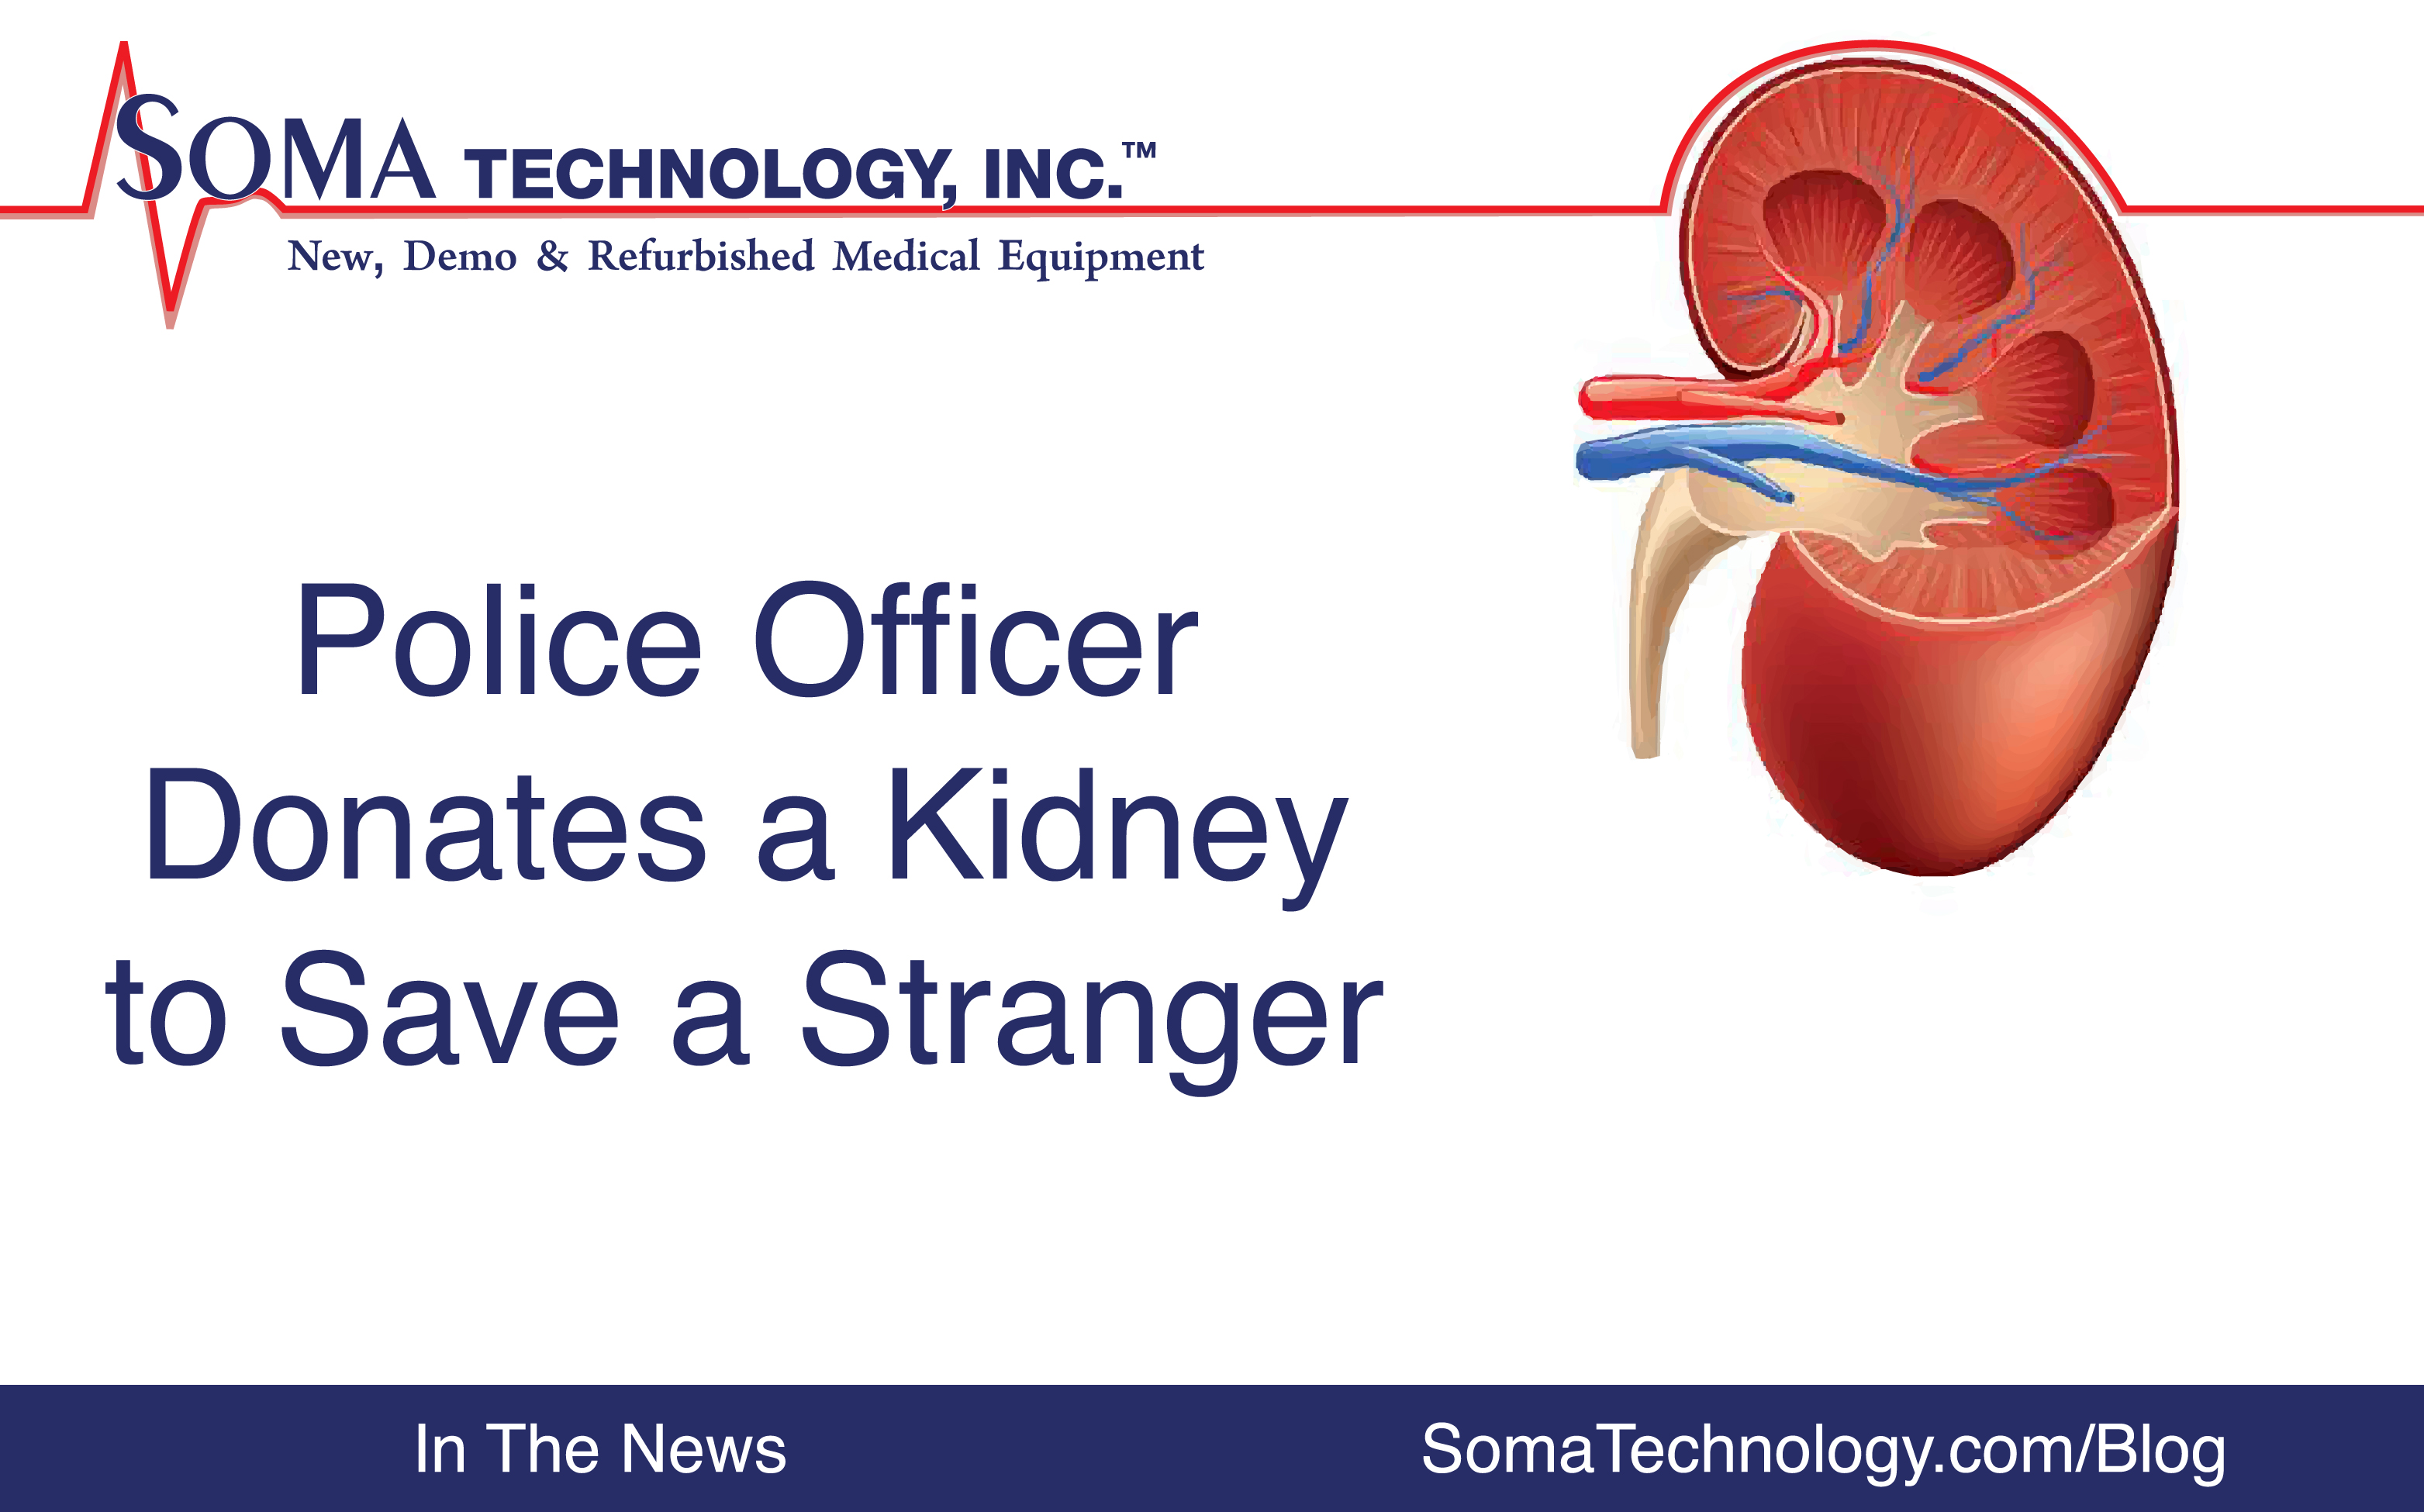 Police Officer Donates a Kidney to Save a Stranger - Soma Technology, Inc.